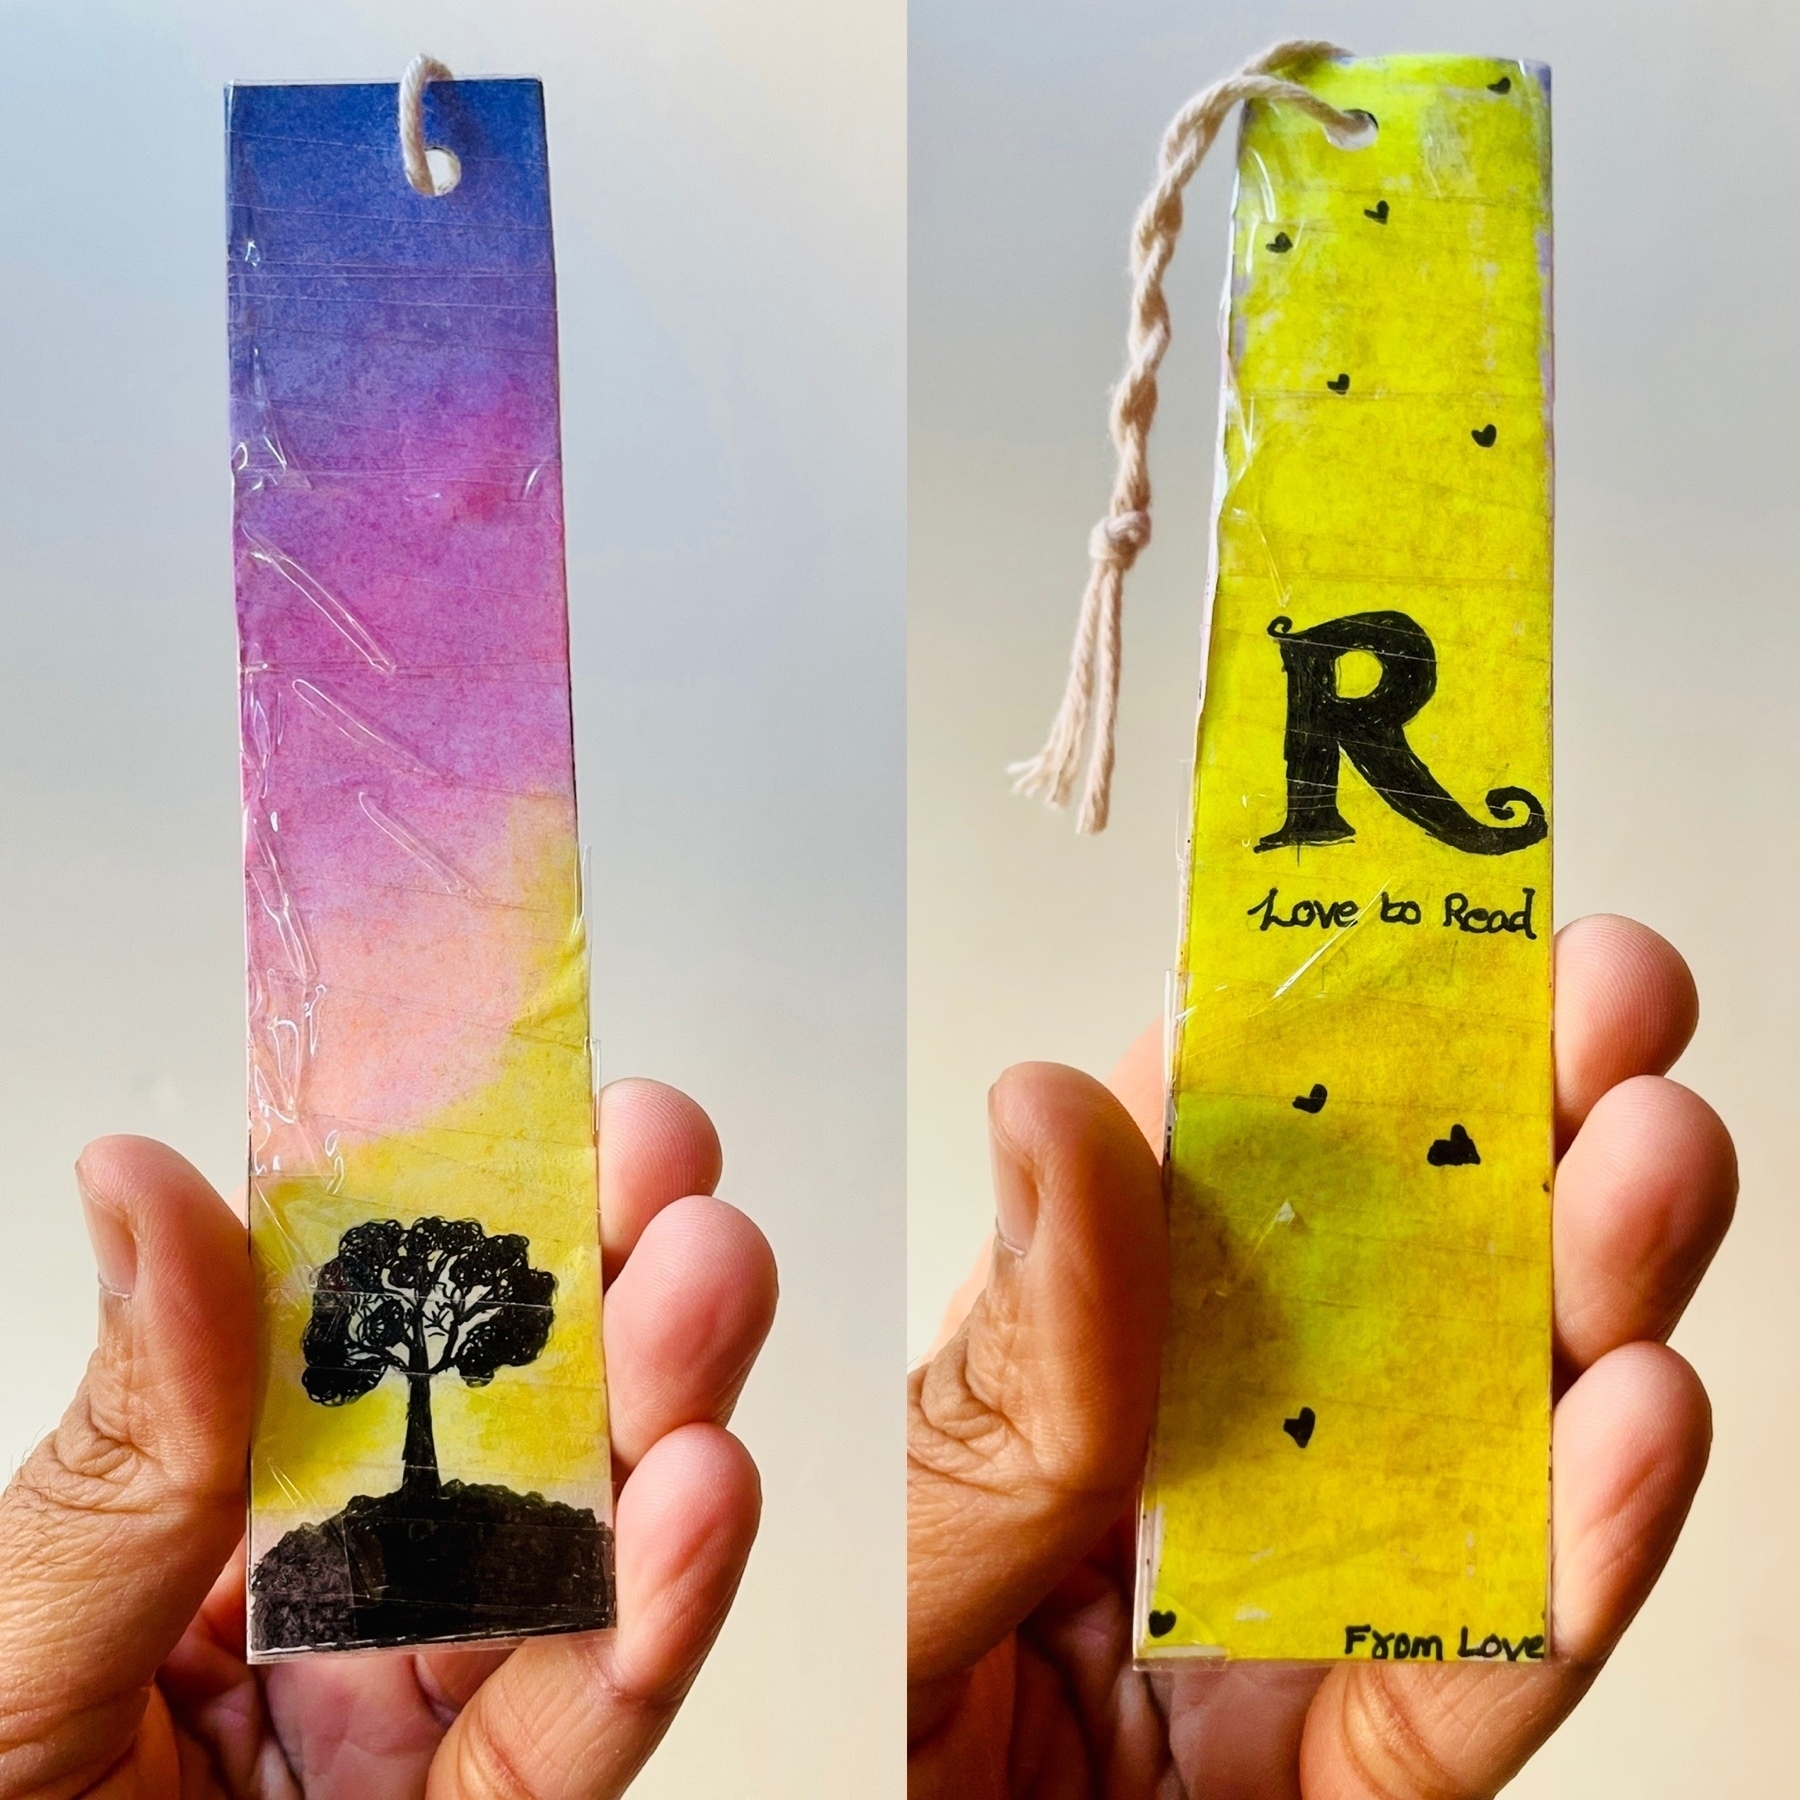 https://ridwan.micro.blog/2021/02/09/bookmark-made-by.html